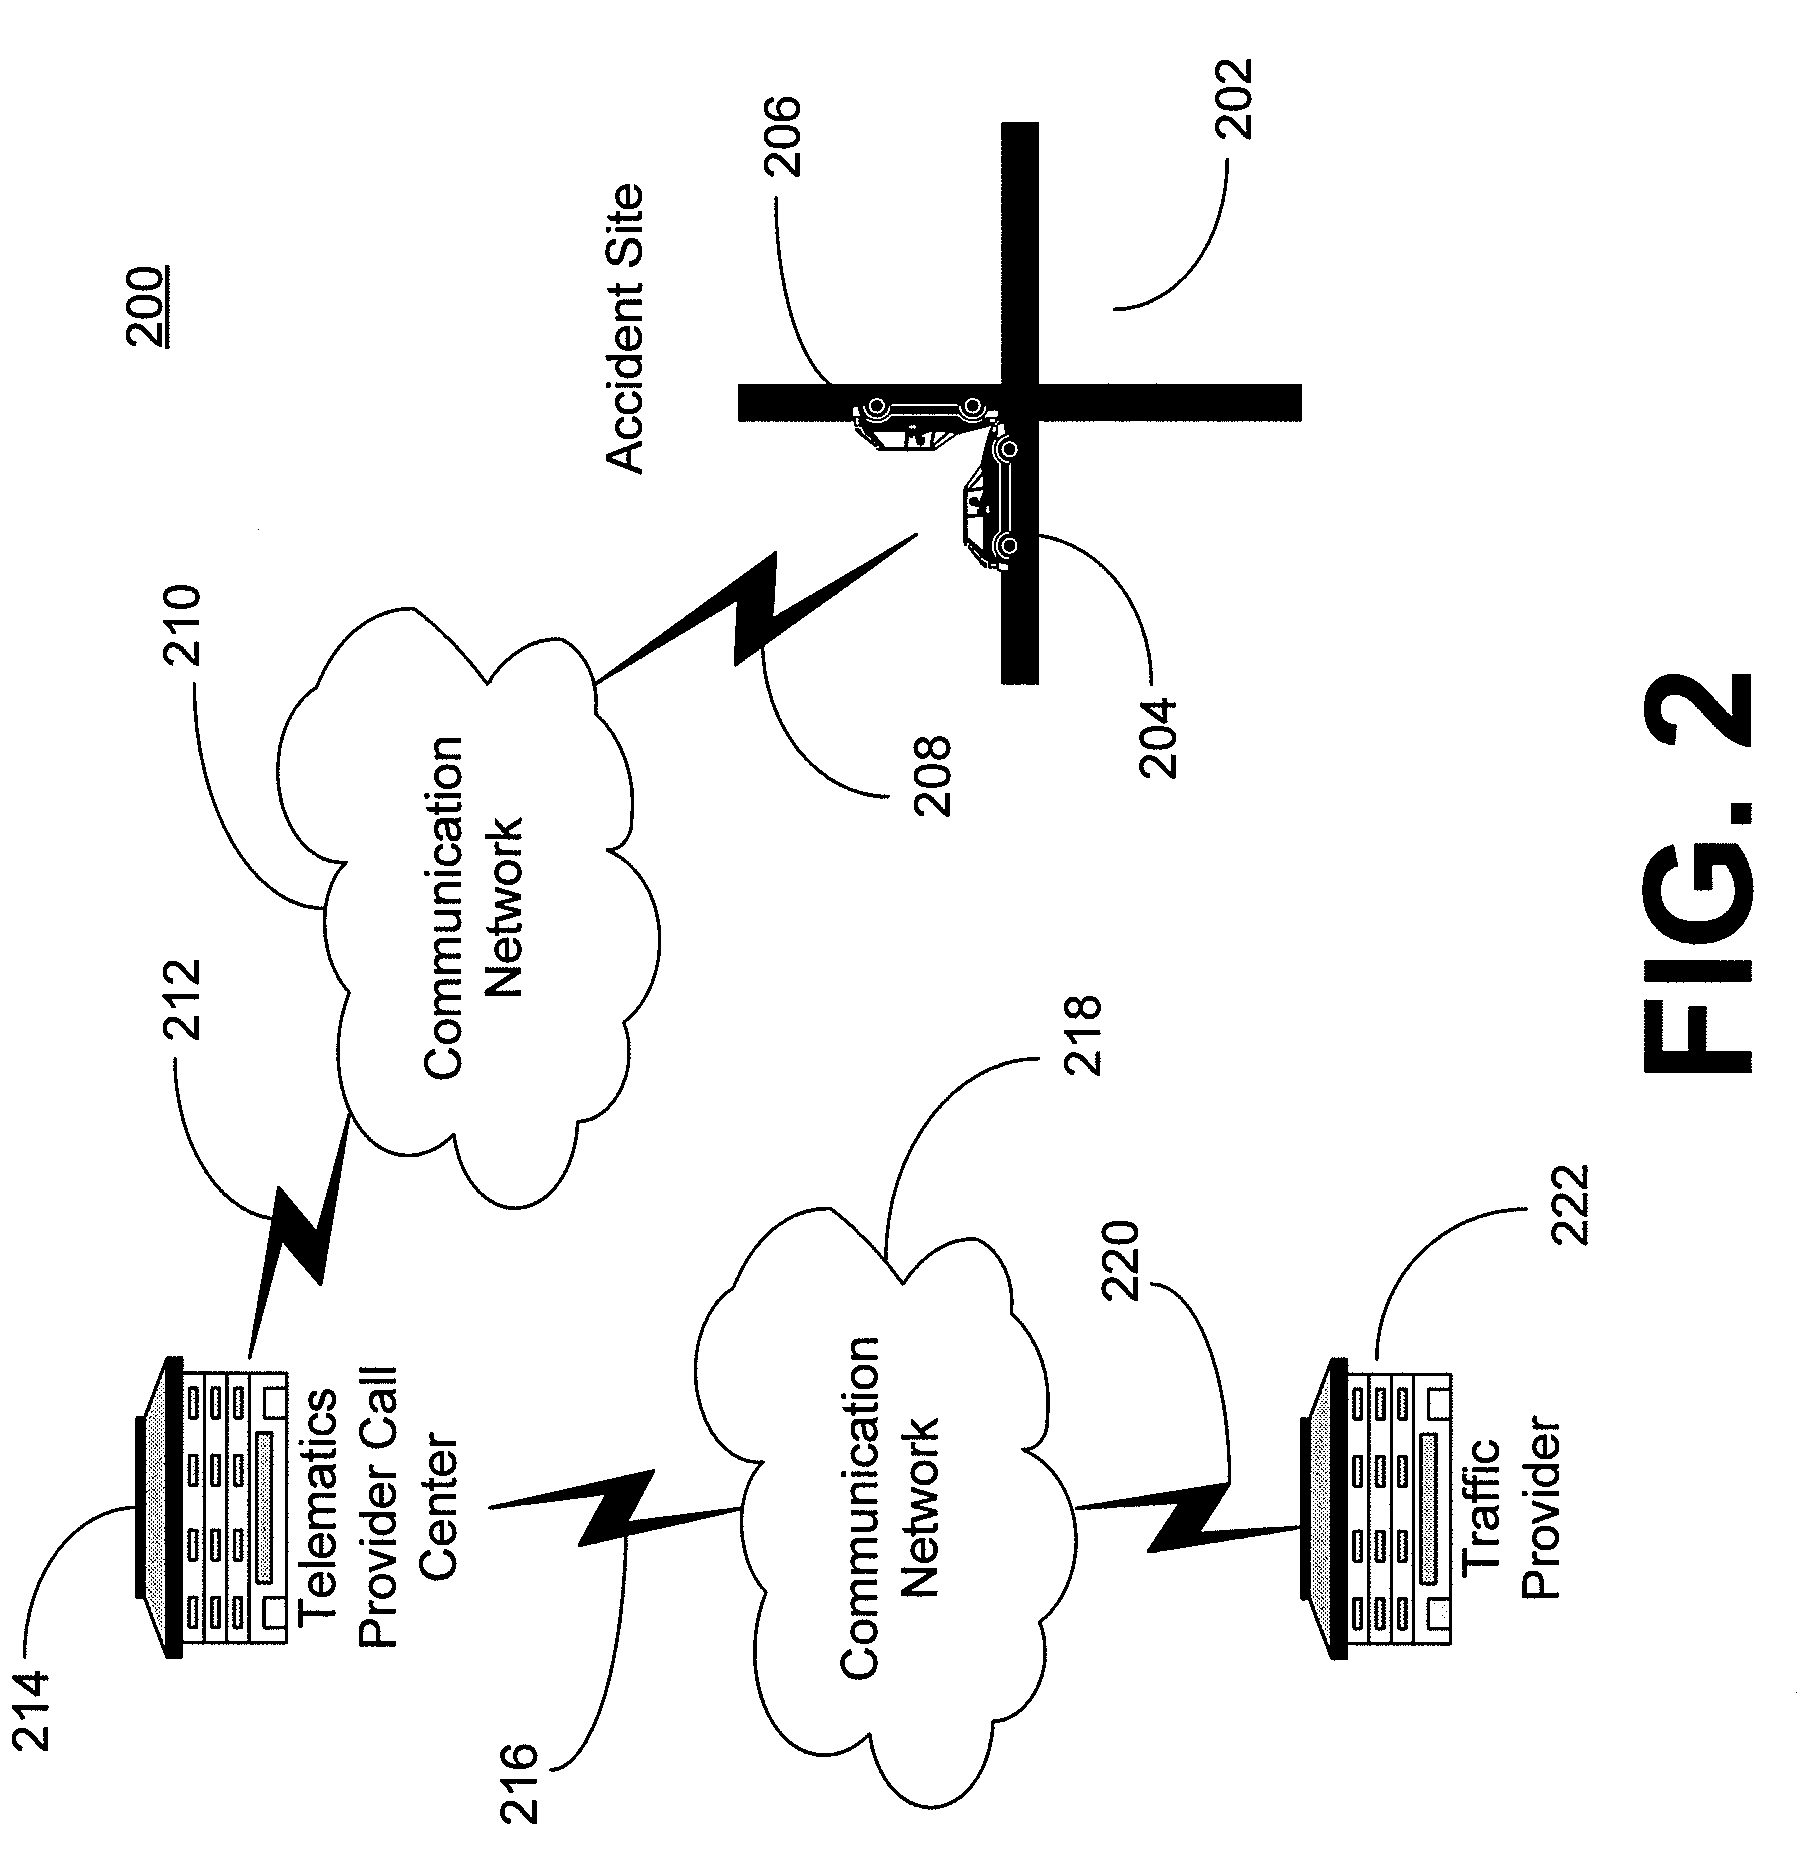 Method and System for Automatically Updating Traffic Incident Data for In-Vehicle Navigation